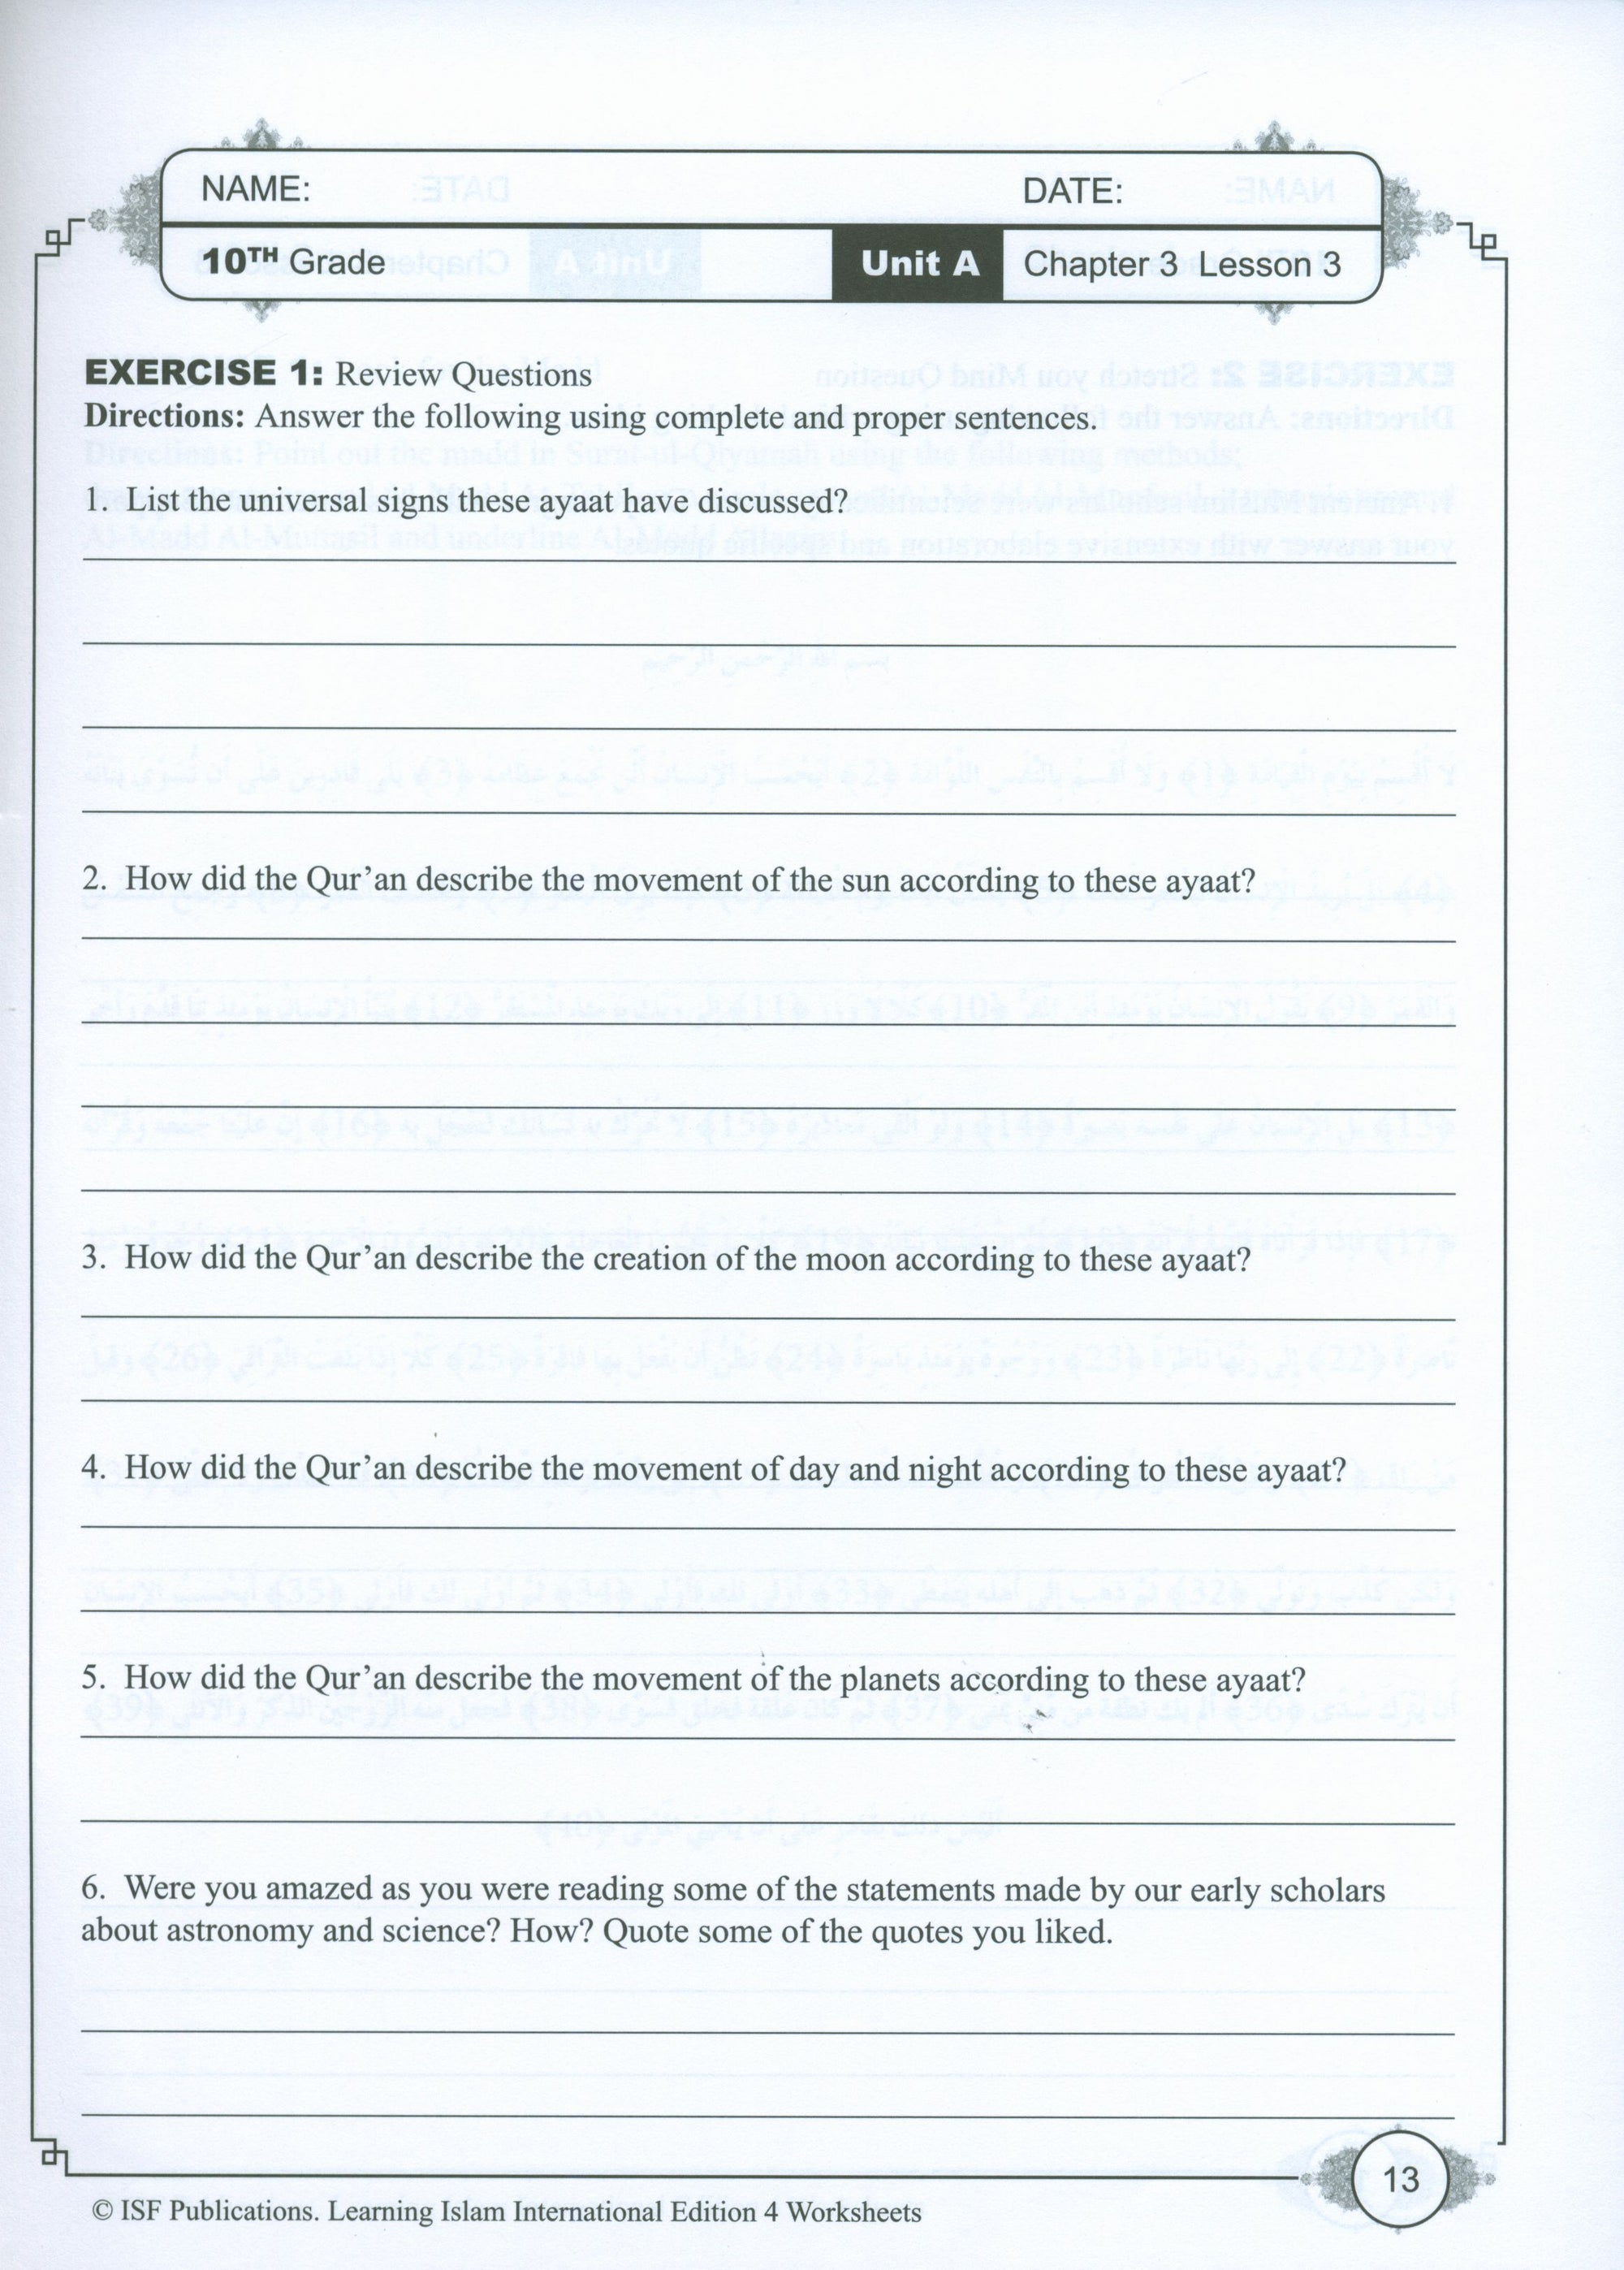 Learning Islam Weekend Edition Worksheets Level 4 (9th Grade)